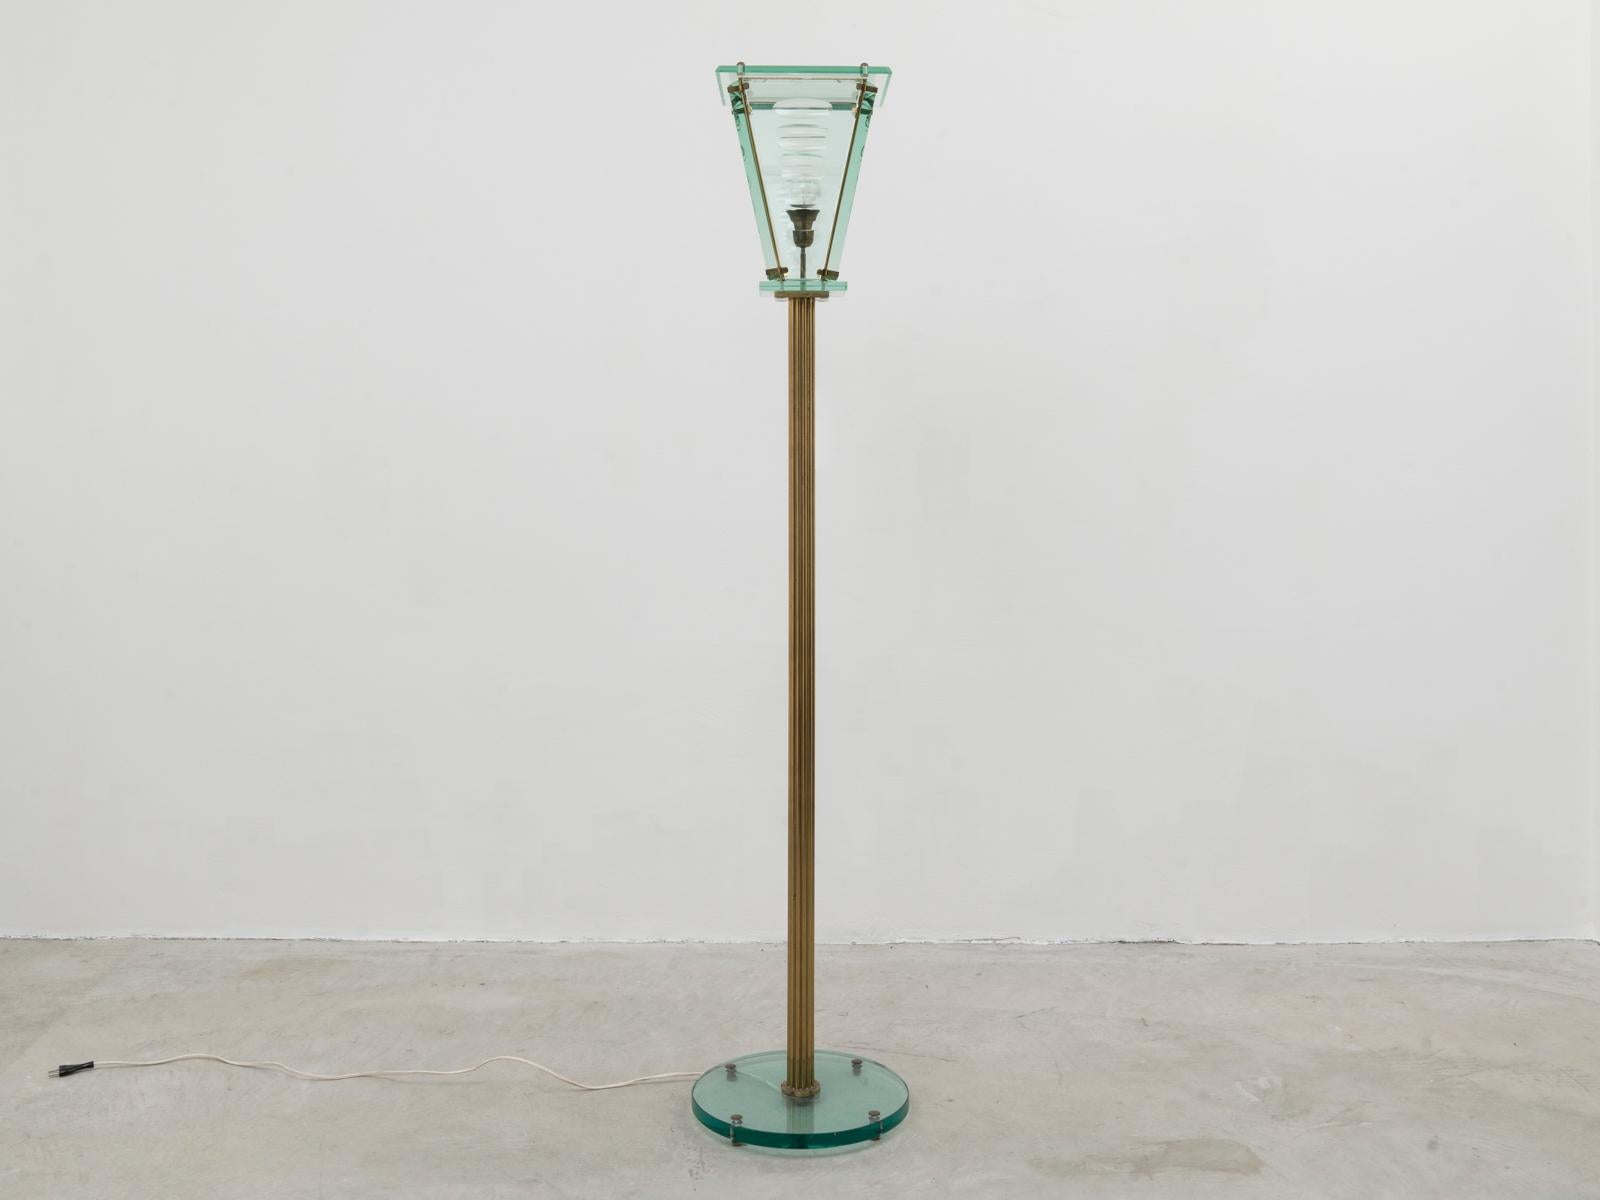 This important floor lamp was designed and manufactured in Italy in the 1940s, and has been attributed to Pietro Chiesa. The lamp was most likely produced by Fontana Arte or Brusotti, two company that Chiesa worked for. No other contemporary